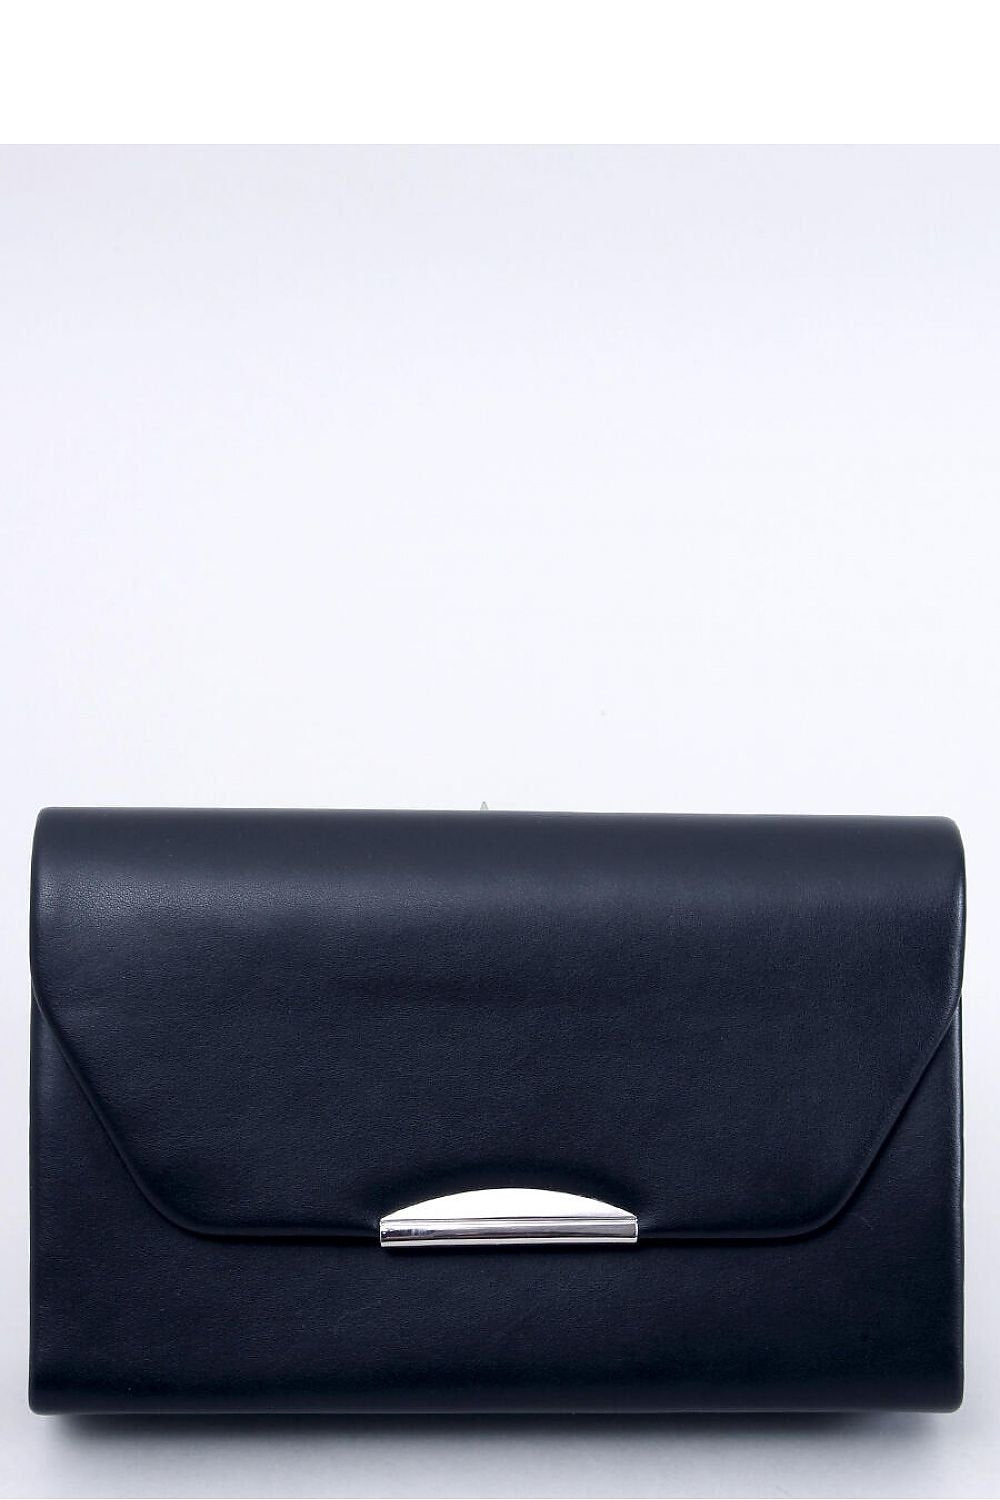 Envelope clutch bag - M&H FashionEnvelope clutch bagM&H FashionM&H Fashion189625_1103883one-size-fits-allEnvelope clutch bag InelloM&H FashionM&H FashionMatte handbag for women ? clutch bag in black color. Classics are always in fashion.... It can be worn in two ways ? in hand or on a silver chain attached to it. It Envelope clutch bag